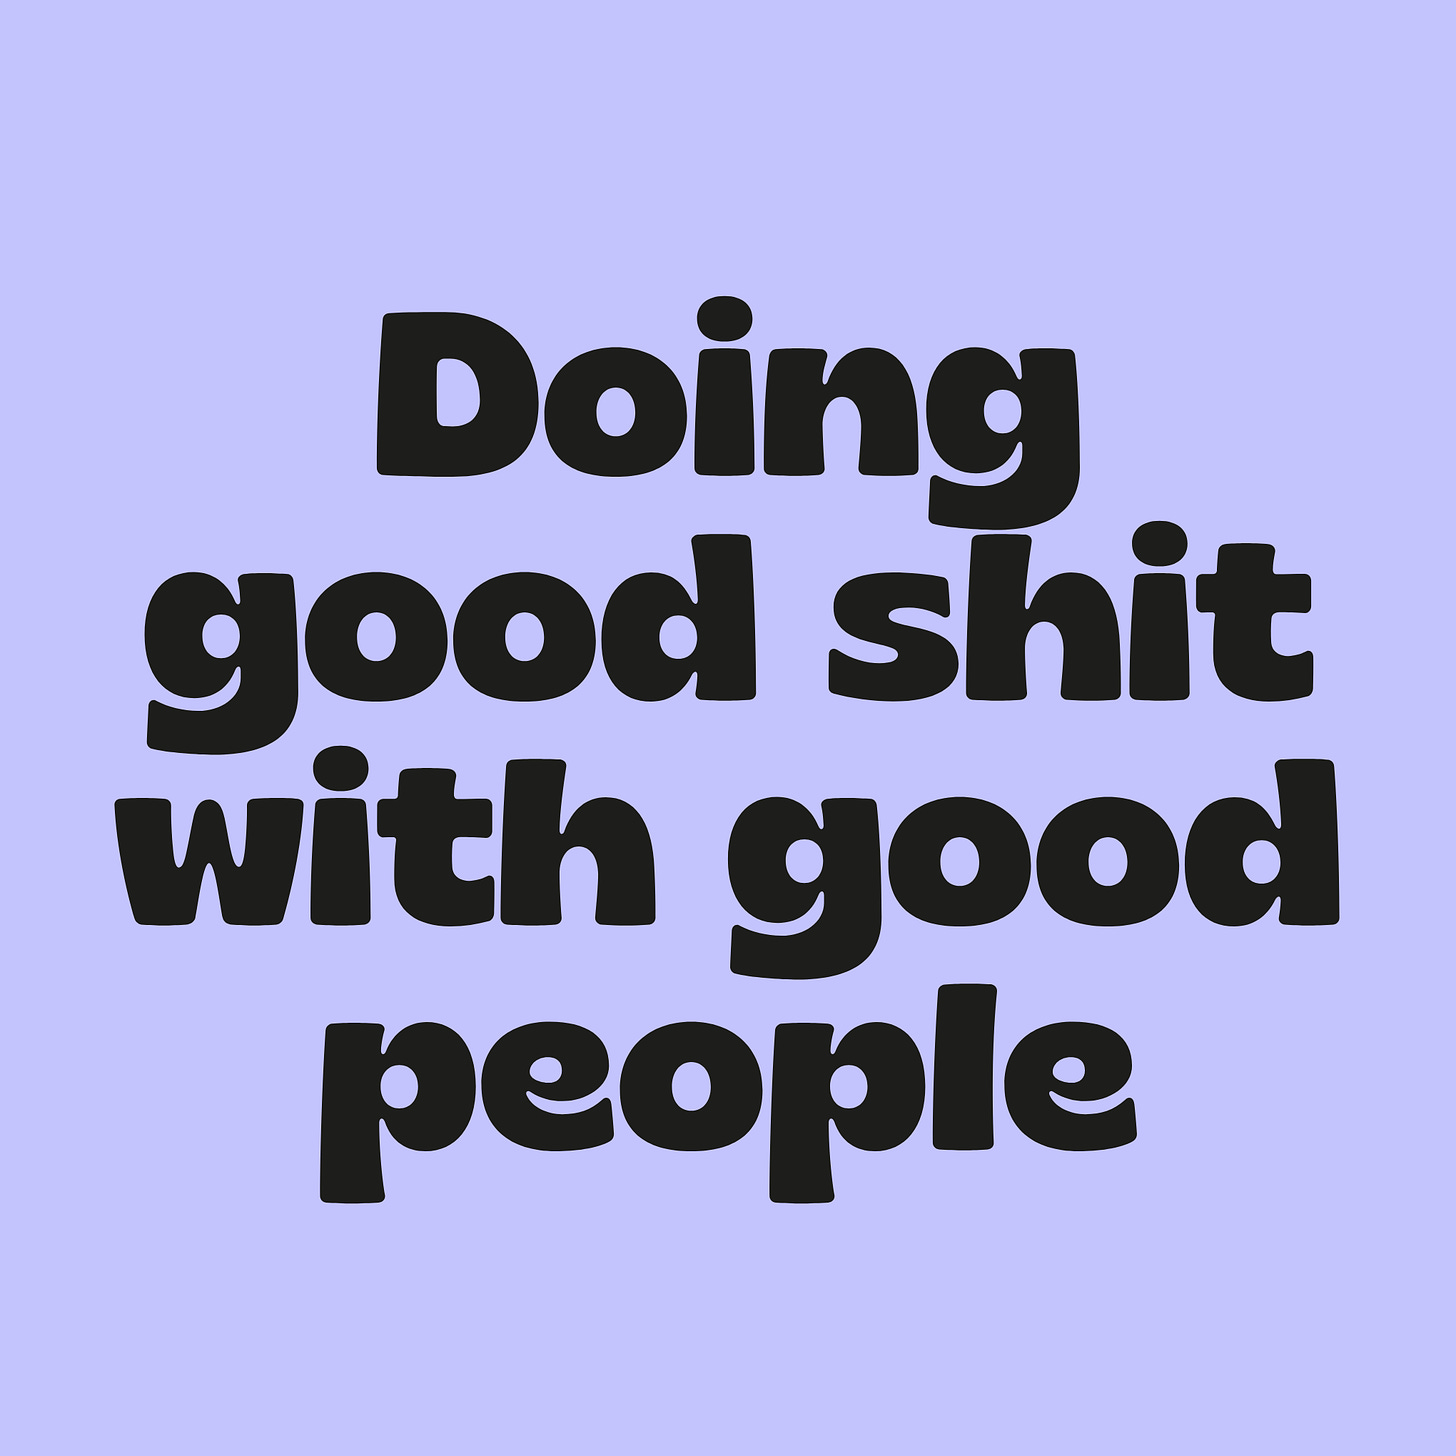 lilac background with bold black text reading "Doing good shit with good people".